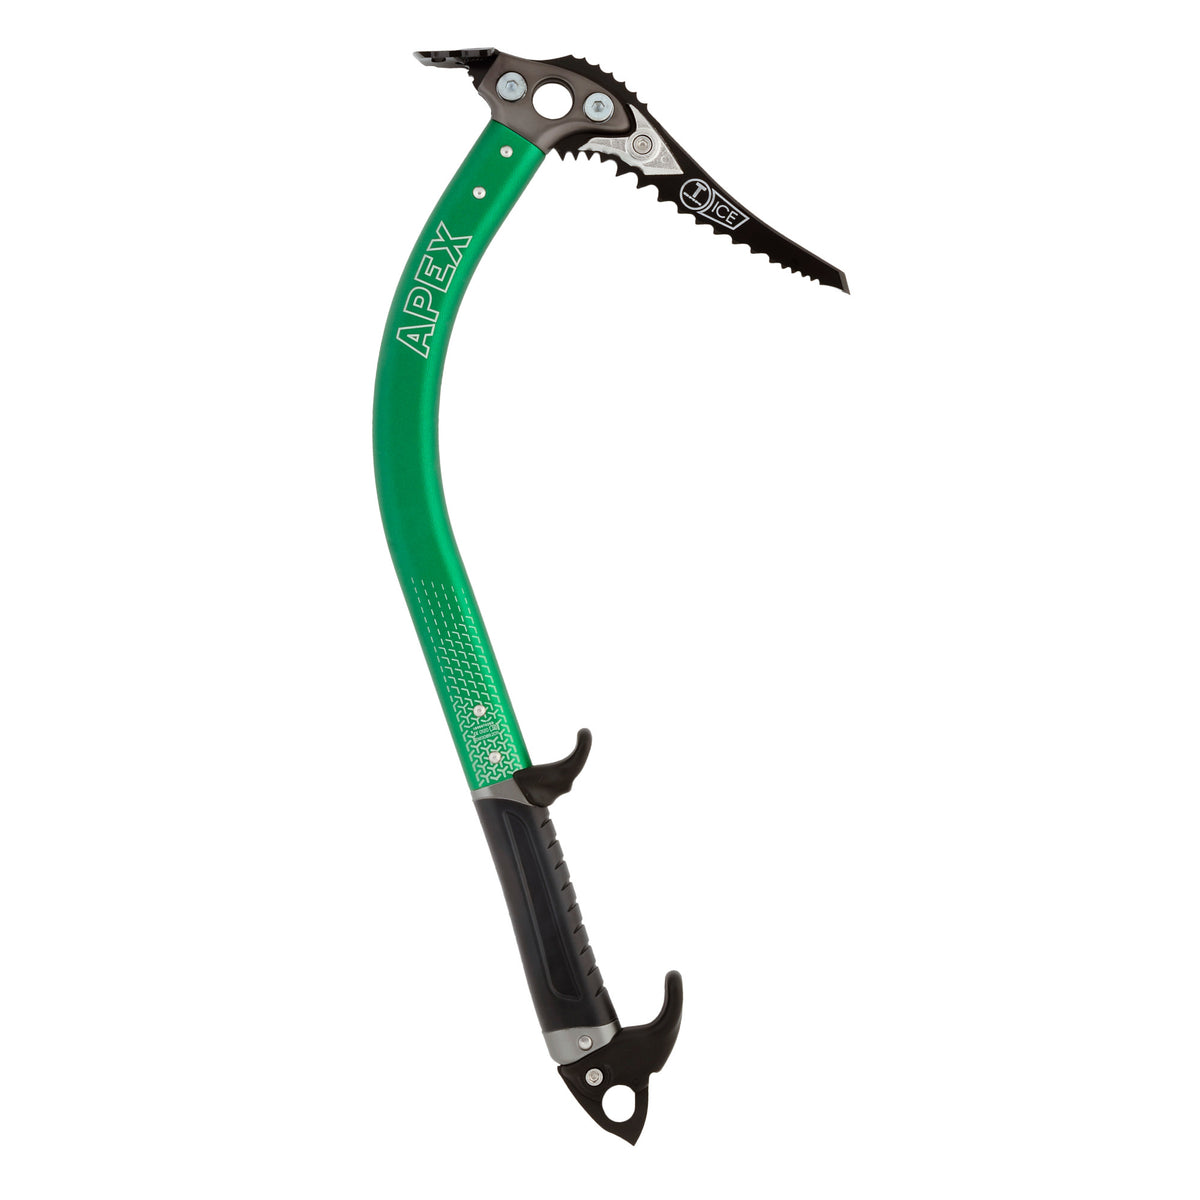 DMM Apex Ice Axe, side view shown in green and black colours